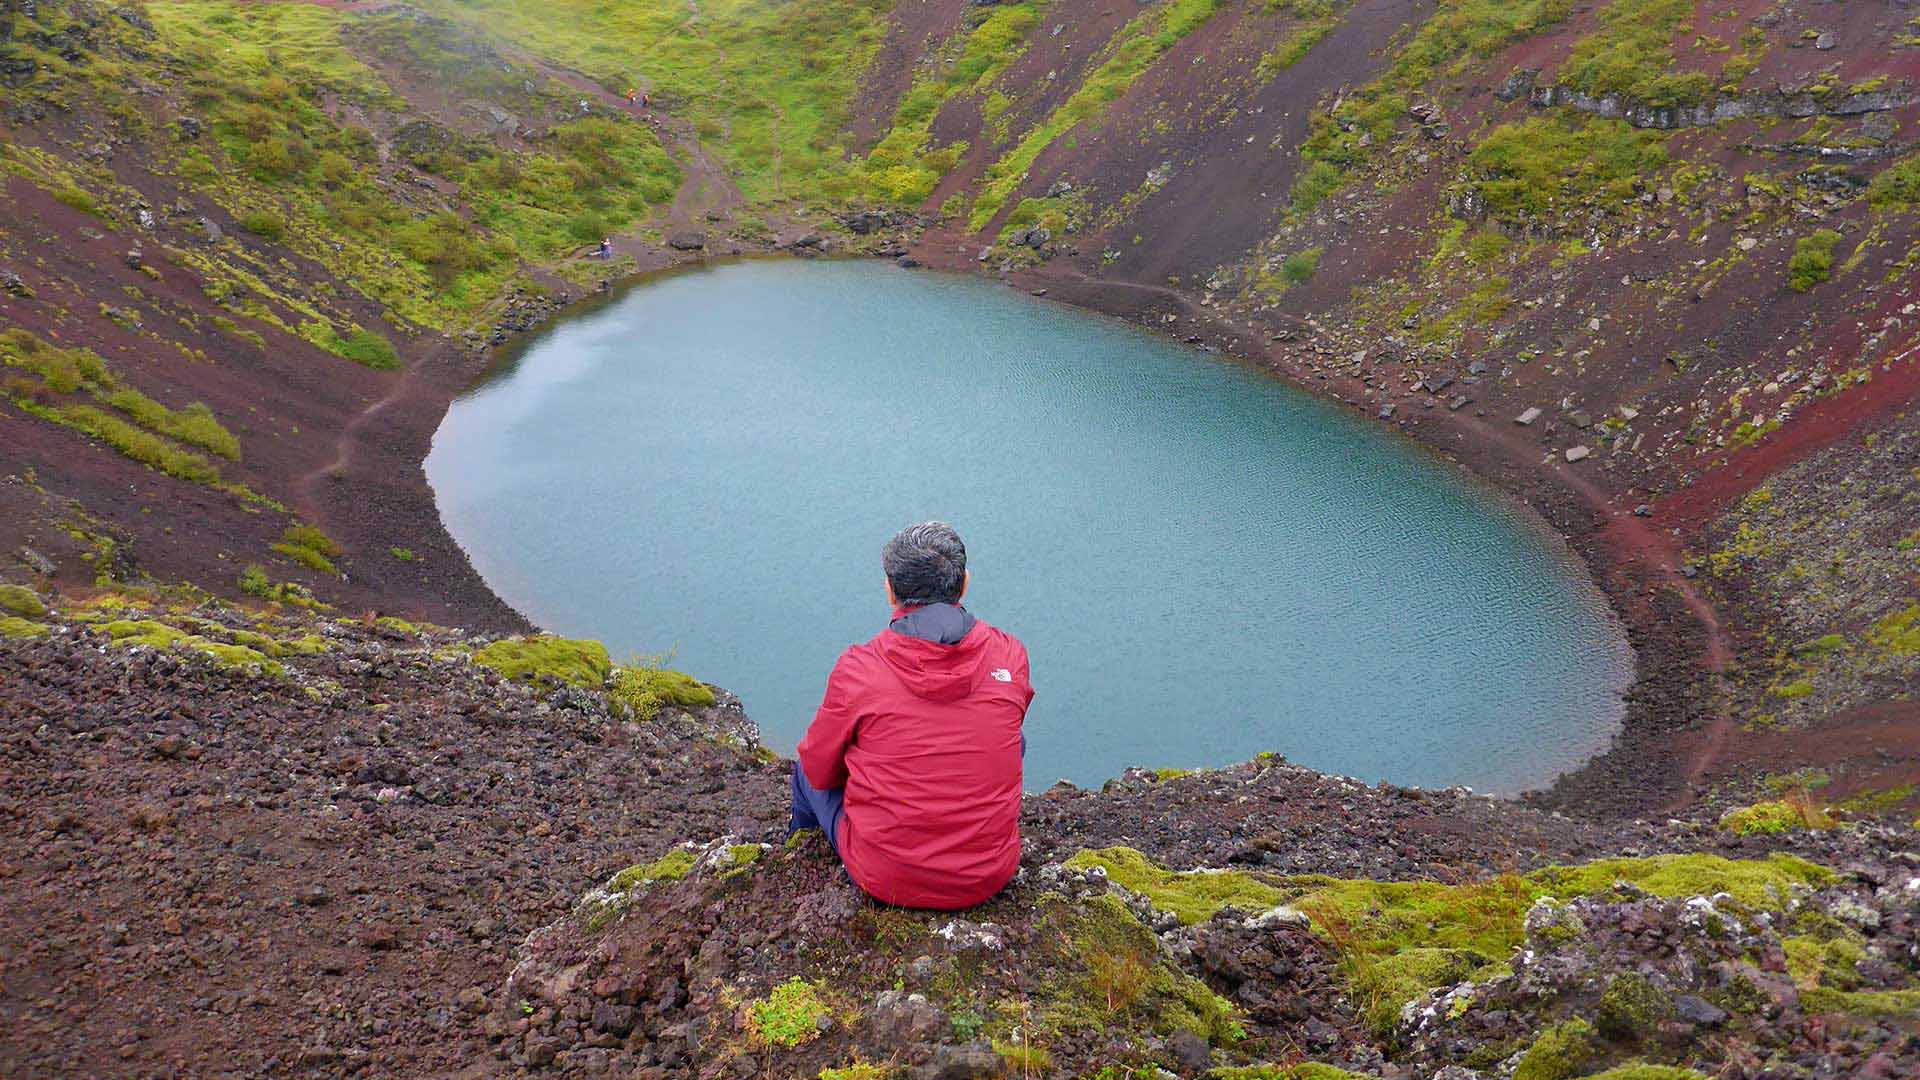 kerid crater iceland